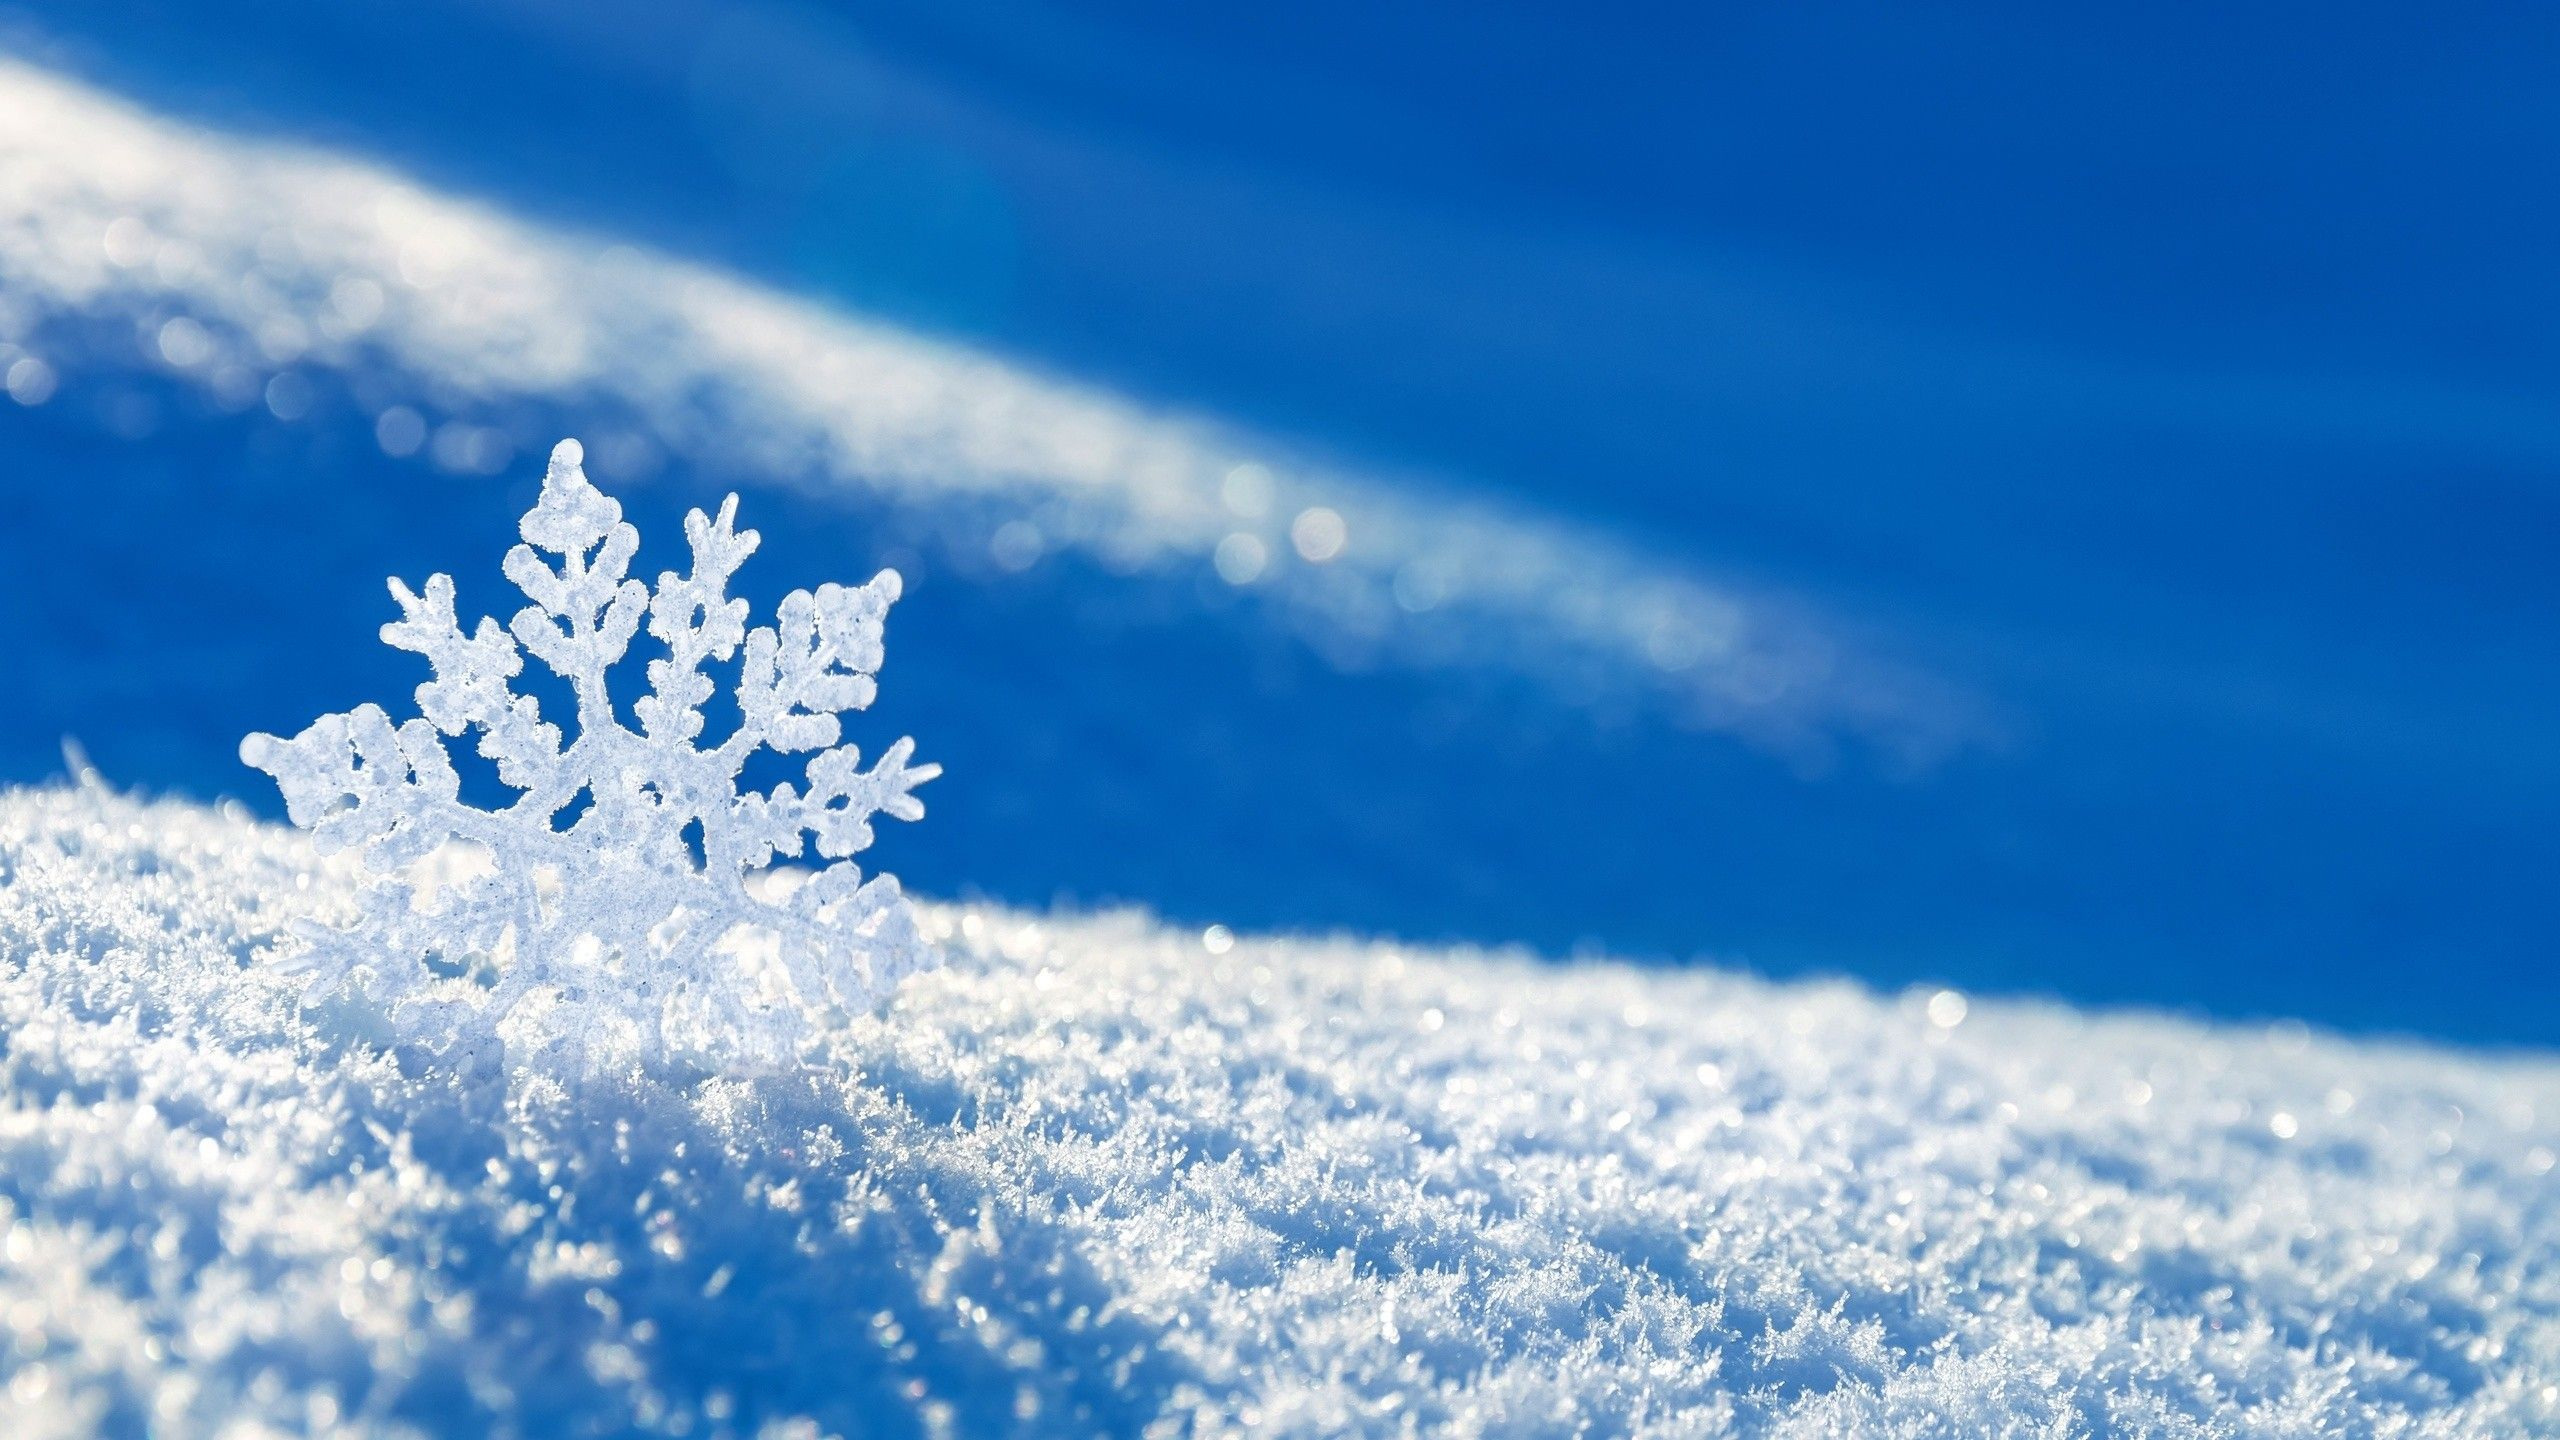 2560x1440 Snowflake Wallpapers Top Free Snowflake Backgrounds